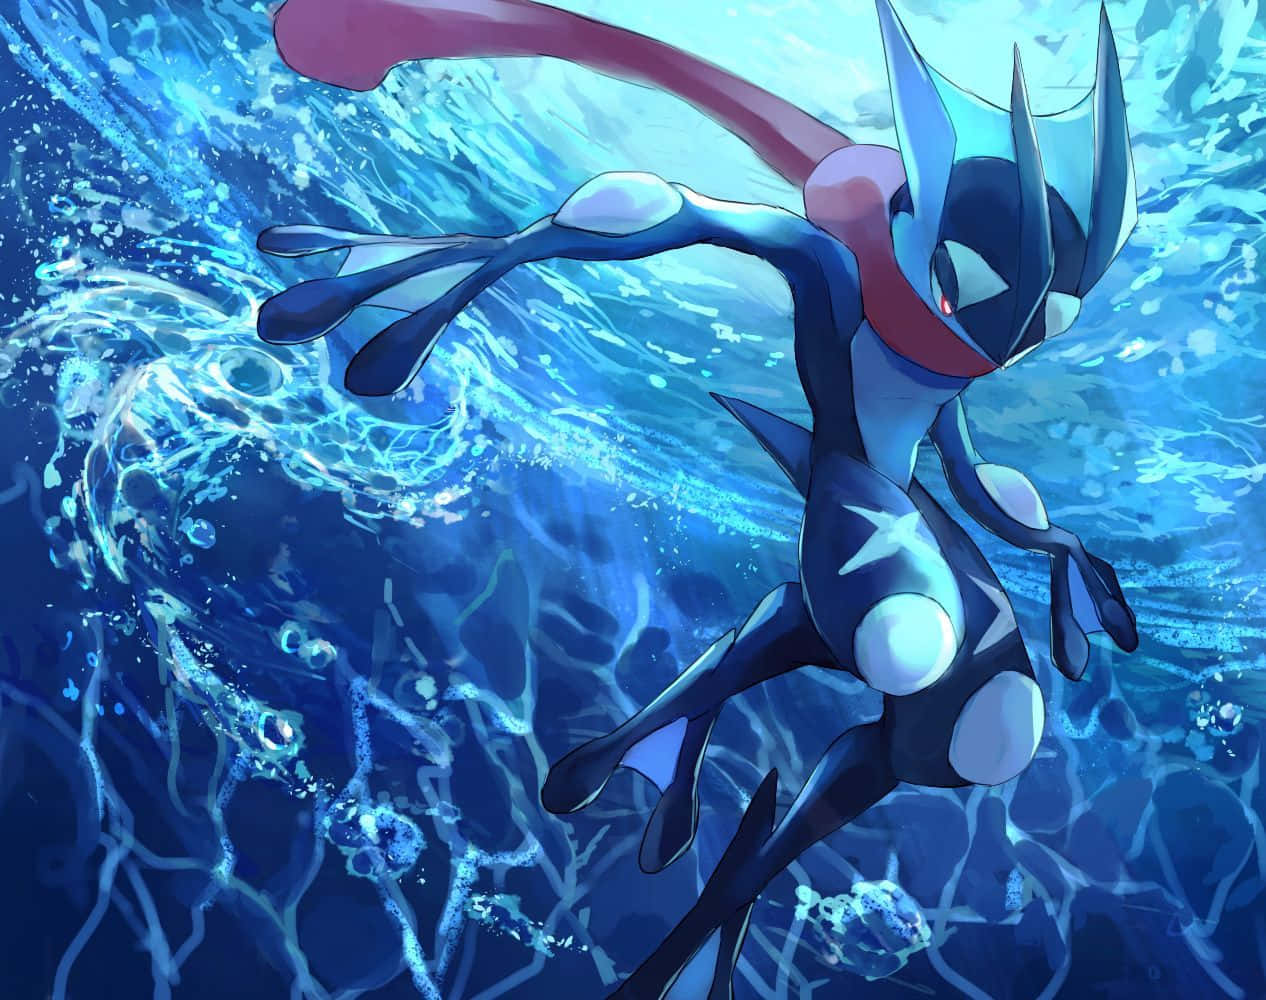 Greninja about to unleash its Hydro Pump attack